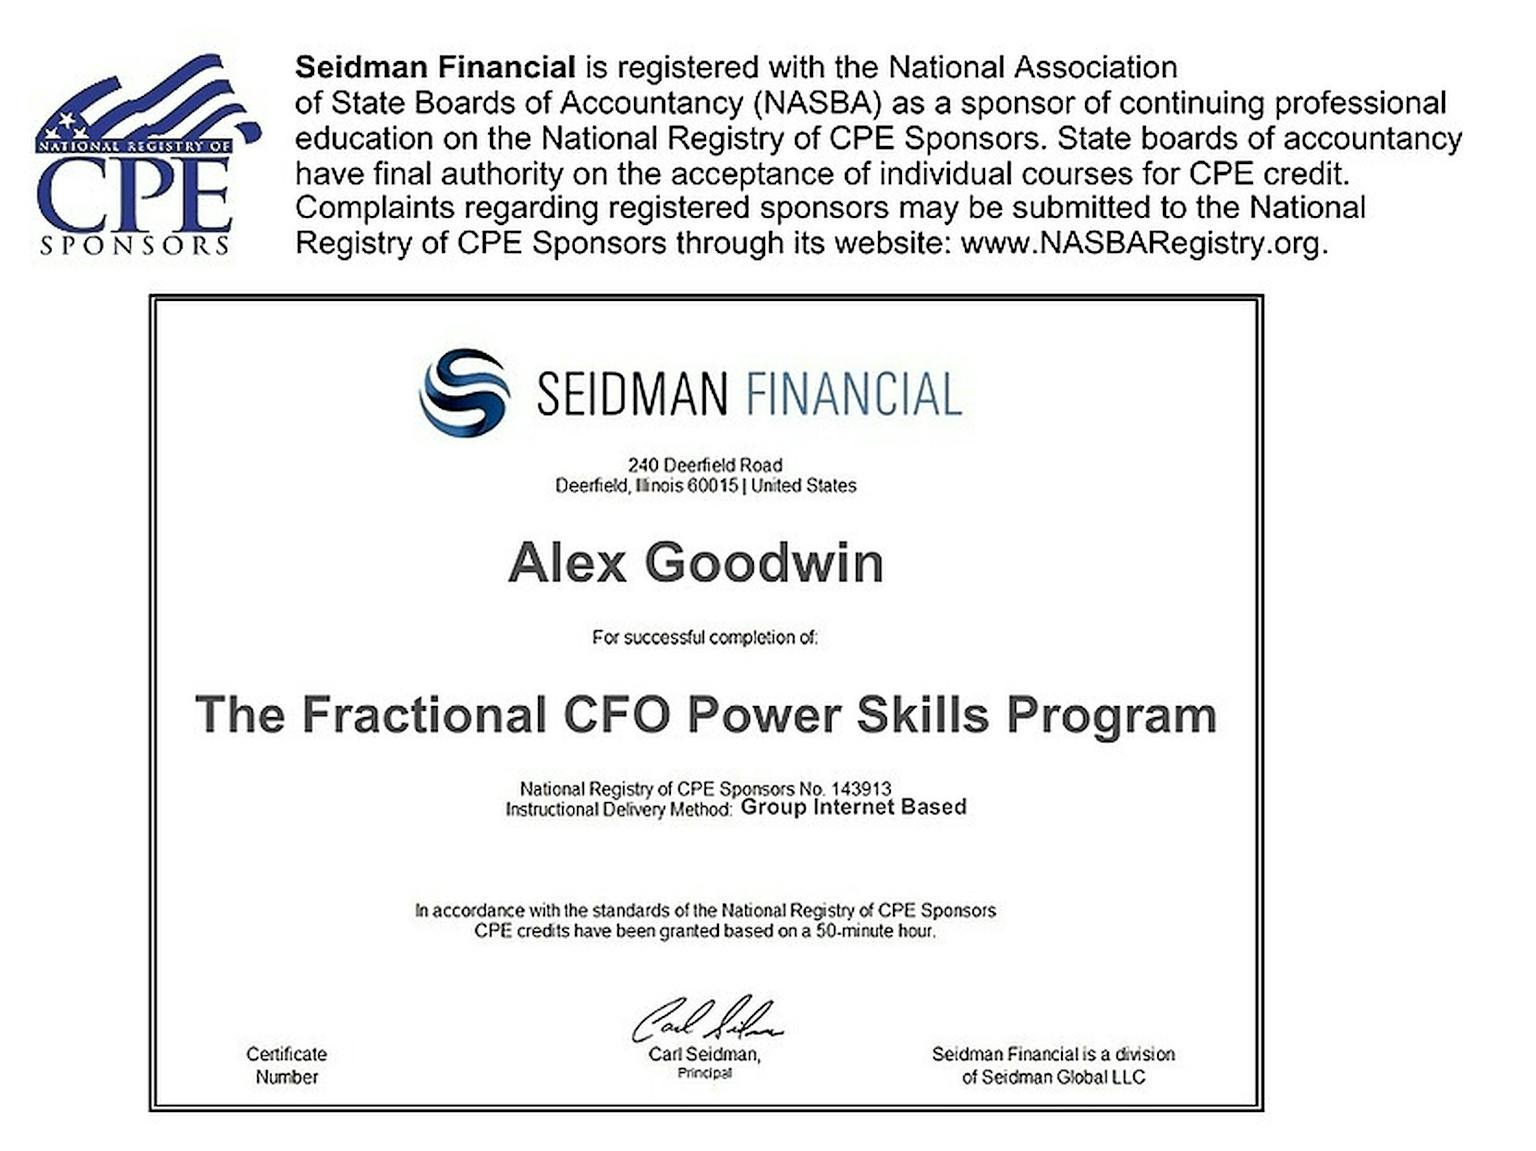 Seidman Financial is registered with the National Association of State Boards of Accountancy (NASBA)